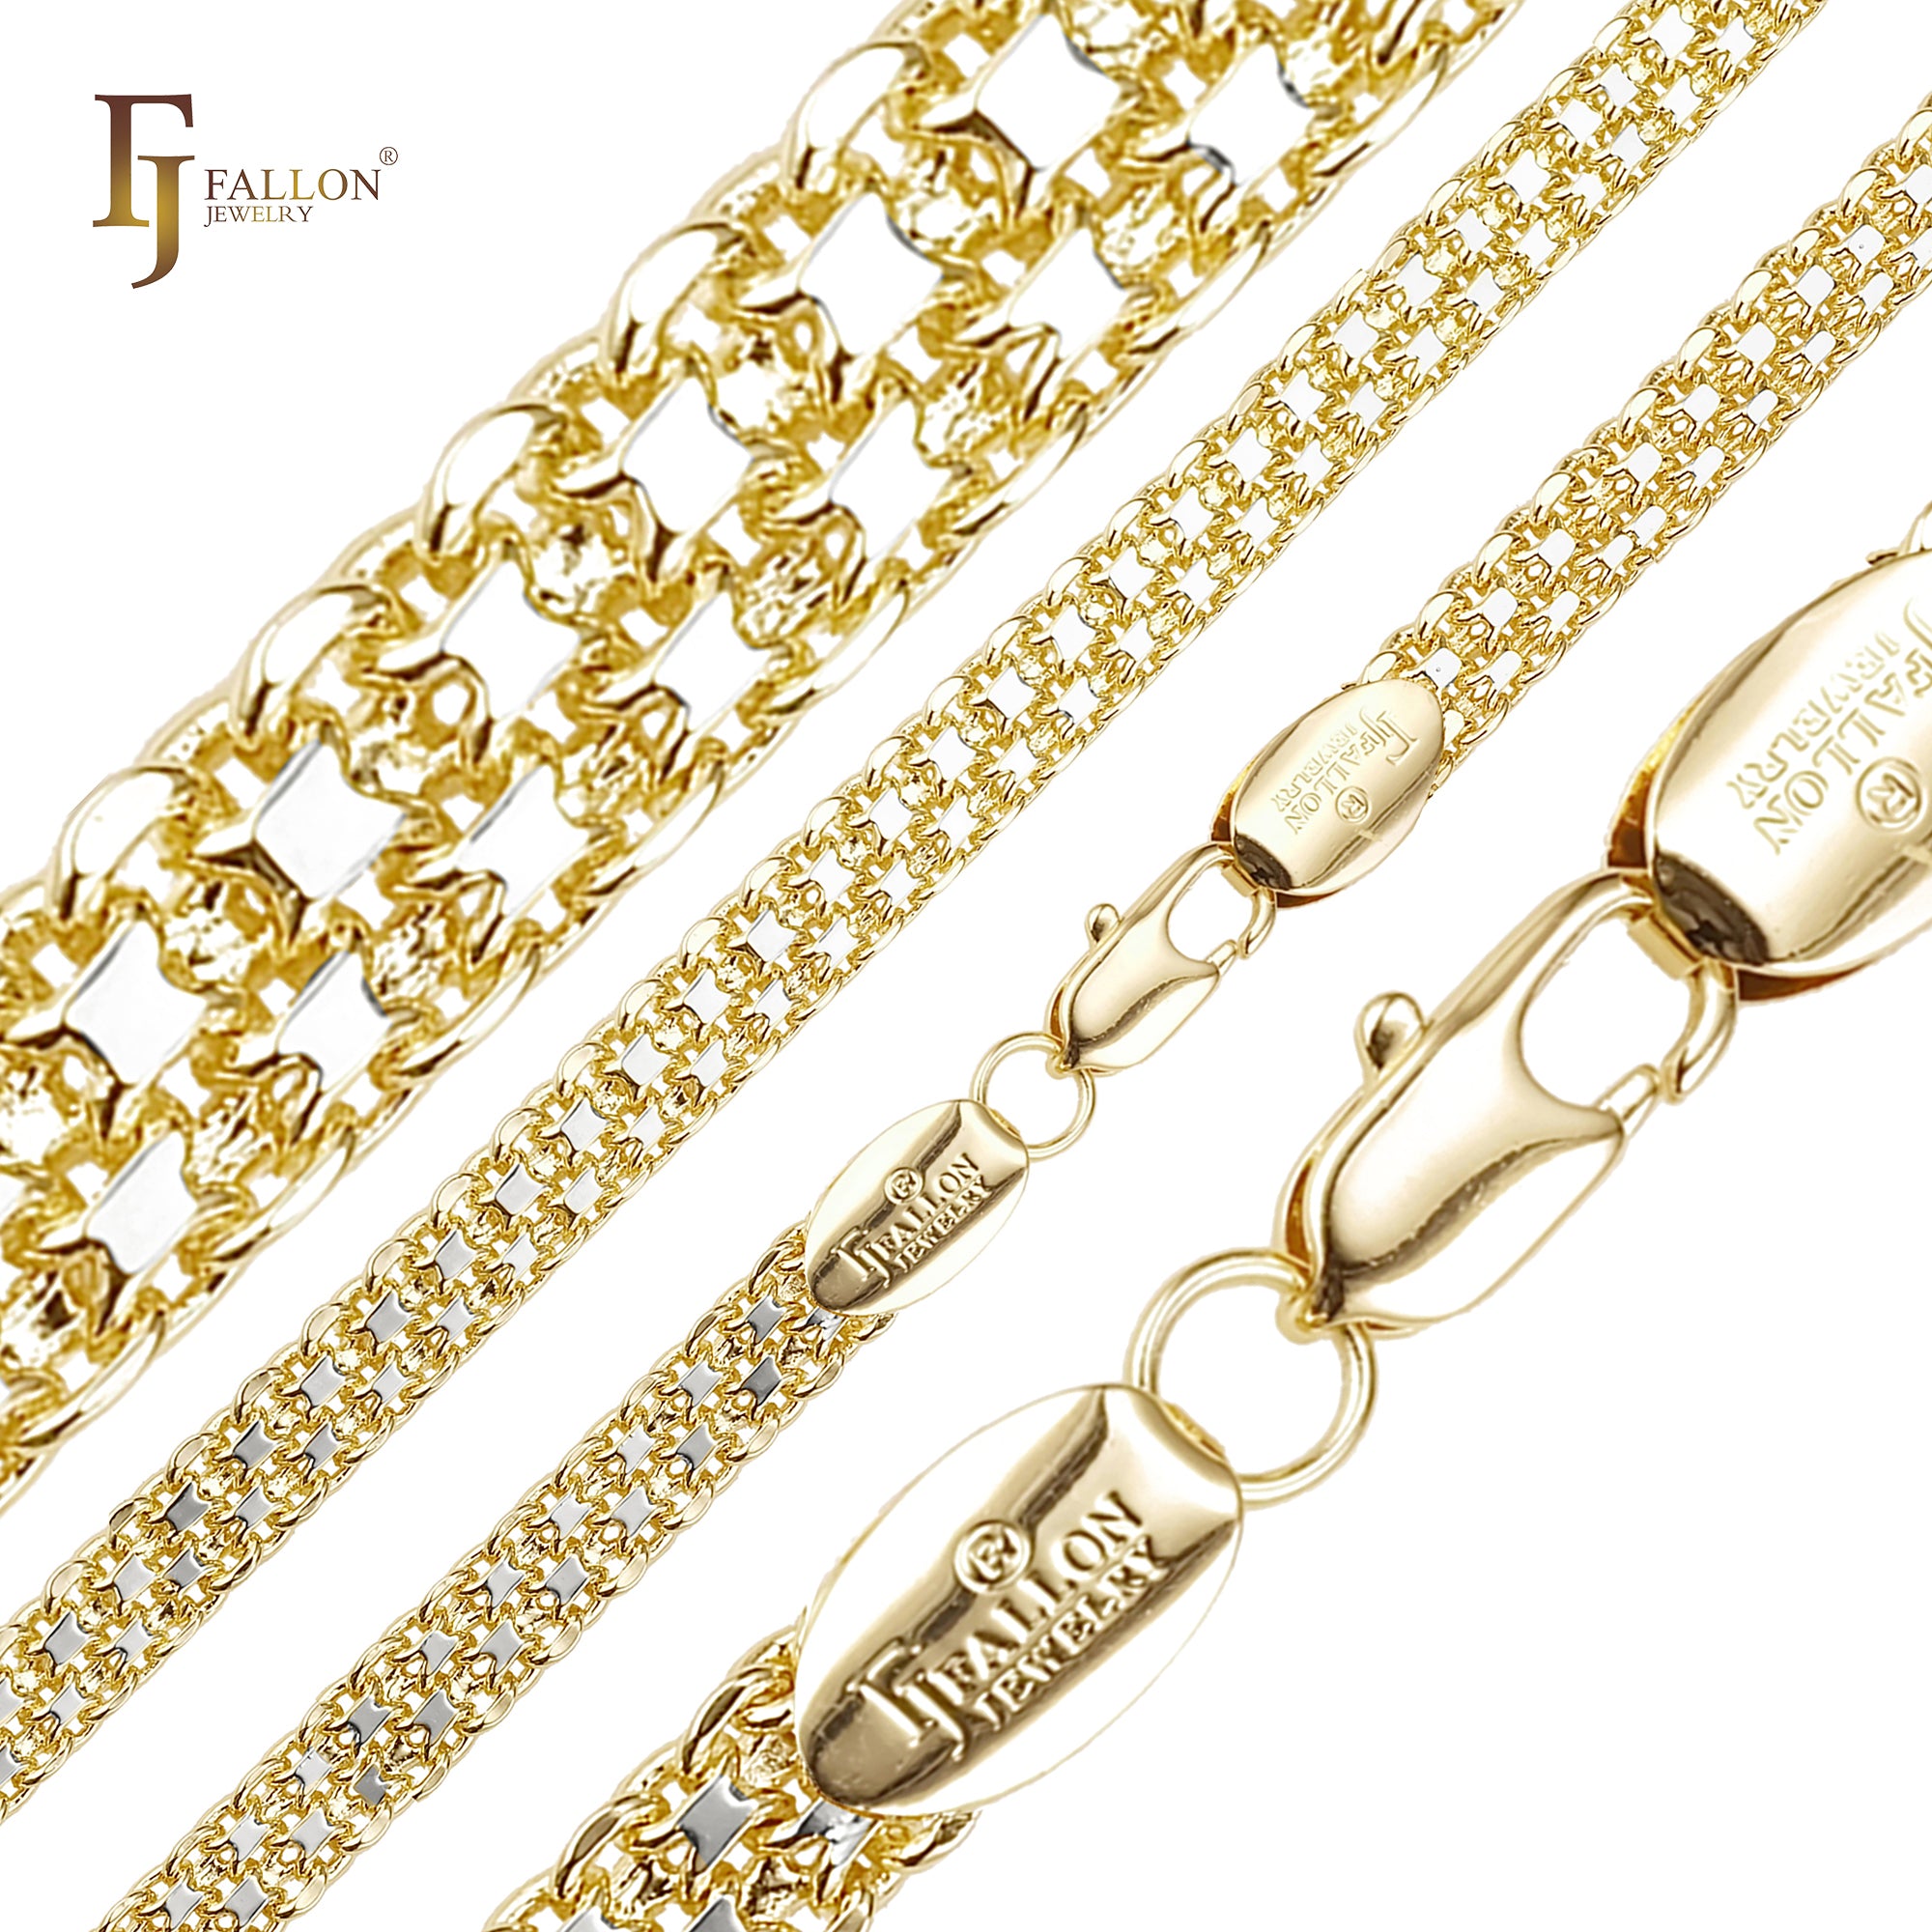 .Bismarck weaving anchor triple link 14K Gold, two tone chains